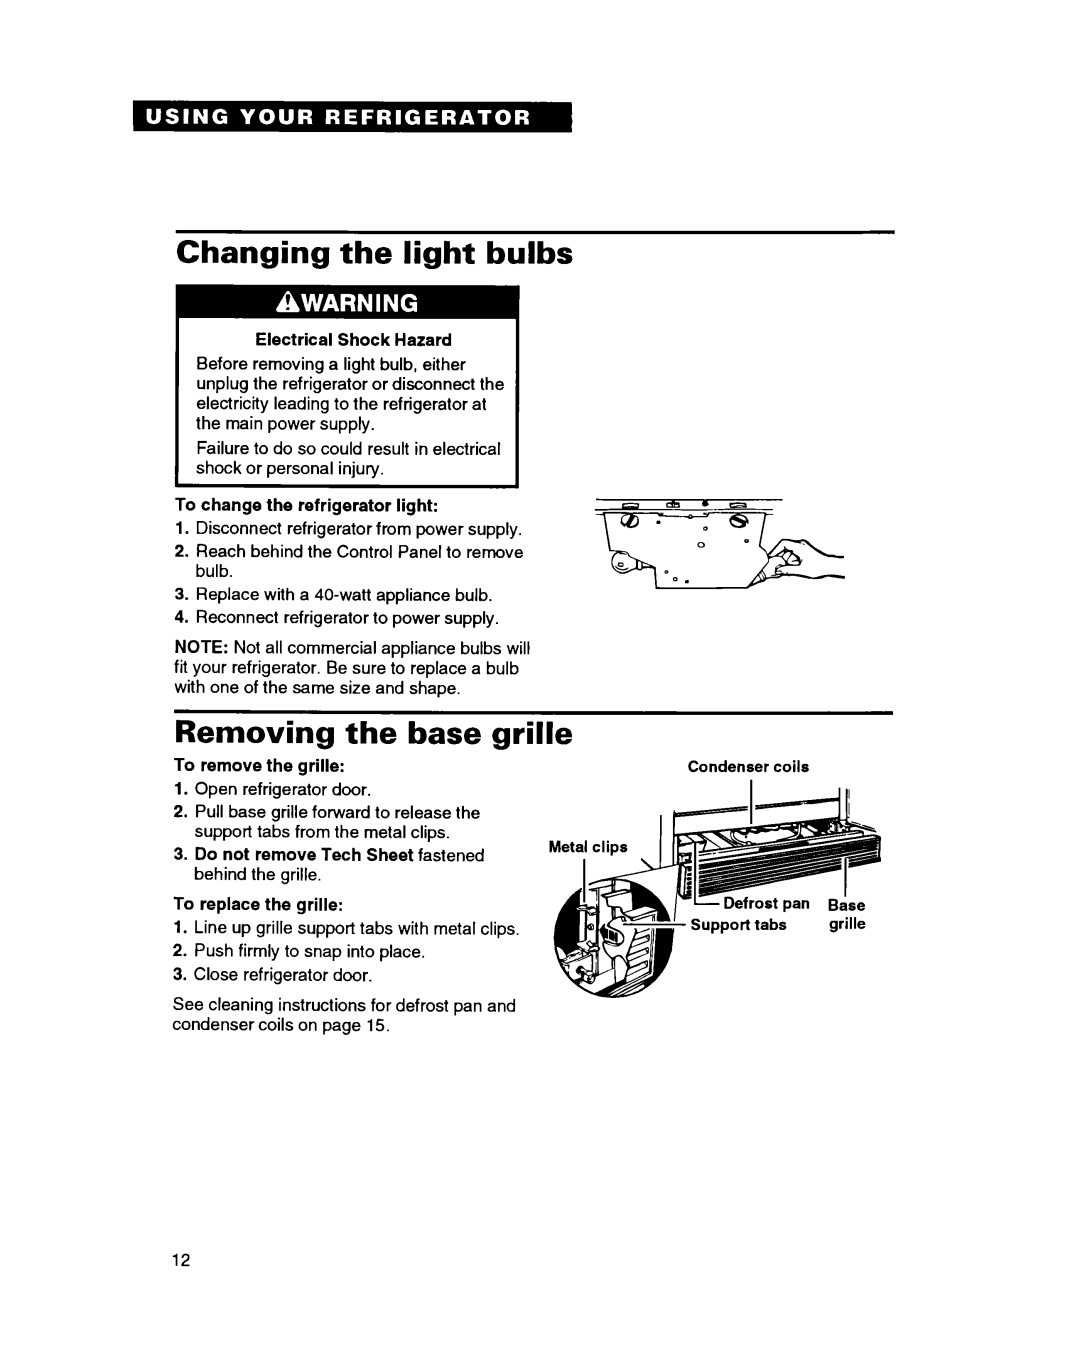 Whirlpool ET18GK warranty Changing the light bulbs, Removing the base grille 